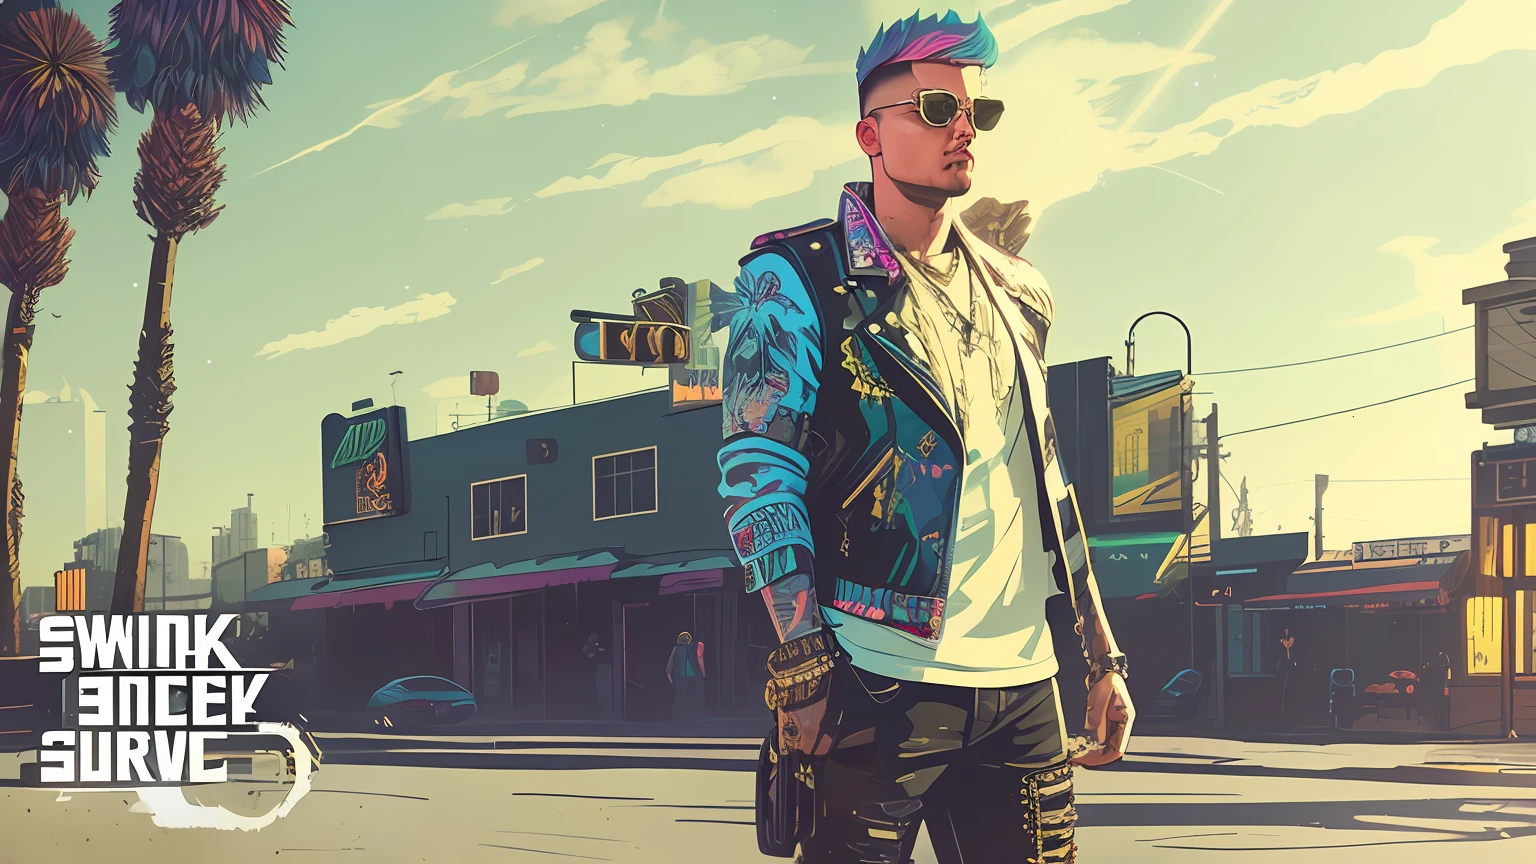 swpunk style,
A stunning intricate full color portrait of young man with a faux hawk,
synthwave lightgeo and light rays, 
wearing a black leather vest,
epic character composition,
thick strokes with paint splatters,
by ilya kuvshinov, alessio albi, nina masic,
sharp focus, natural lighting, subsurface scattering, f2, 35mm, film grain